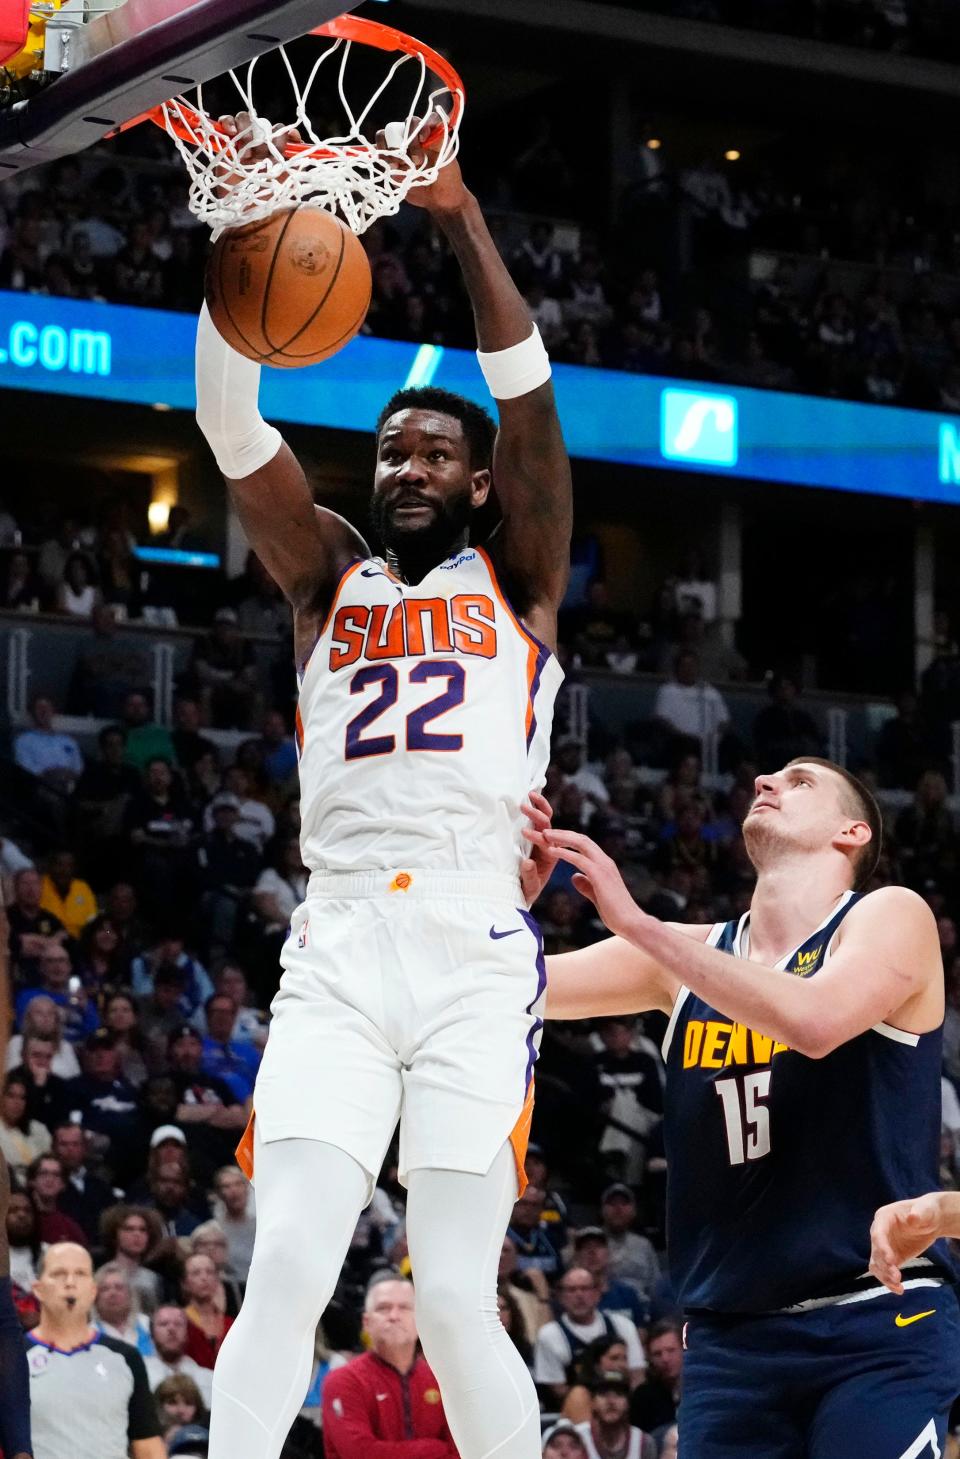 Phoenix Suns center Deandre Ayton (22) slam-dunks the ball over Denver Nuggets center Nikola Jokic (15) in the first half during Game 2 of the Western Conference Semifinals at Ball Arena in Denver on May 1, 2023.